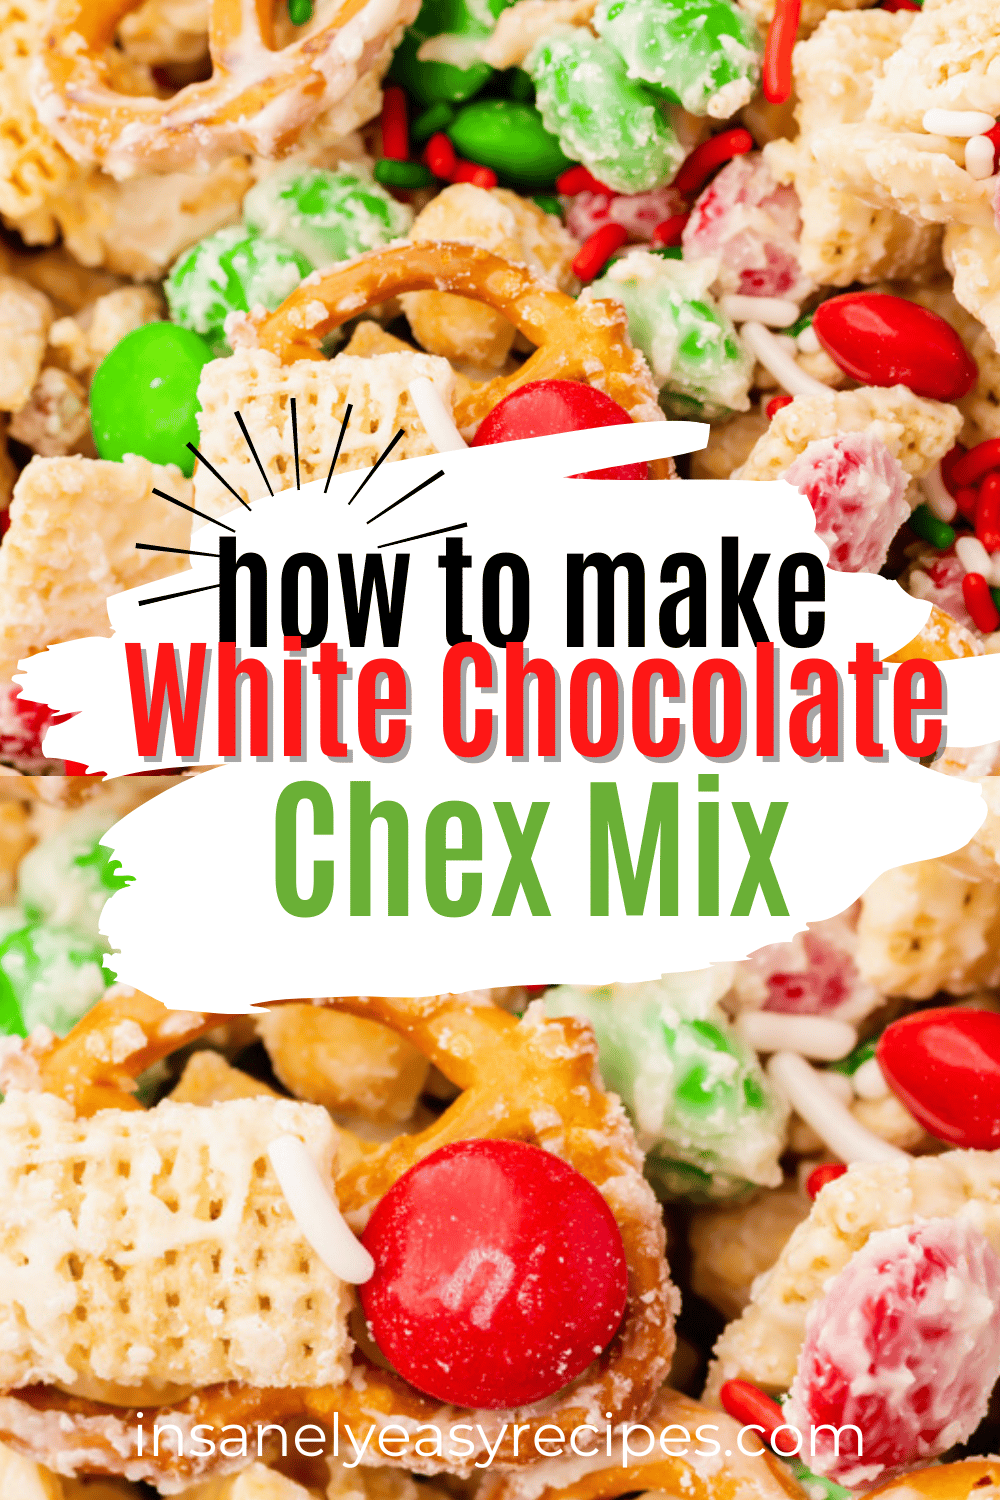 a closeup image of white chocolate chex mix with red and green M&ms, text overlay in center says "how to make white chocolate chex mix"